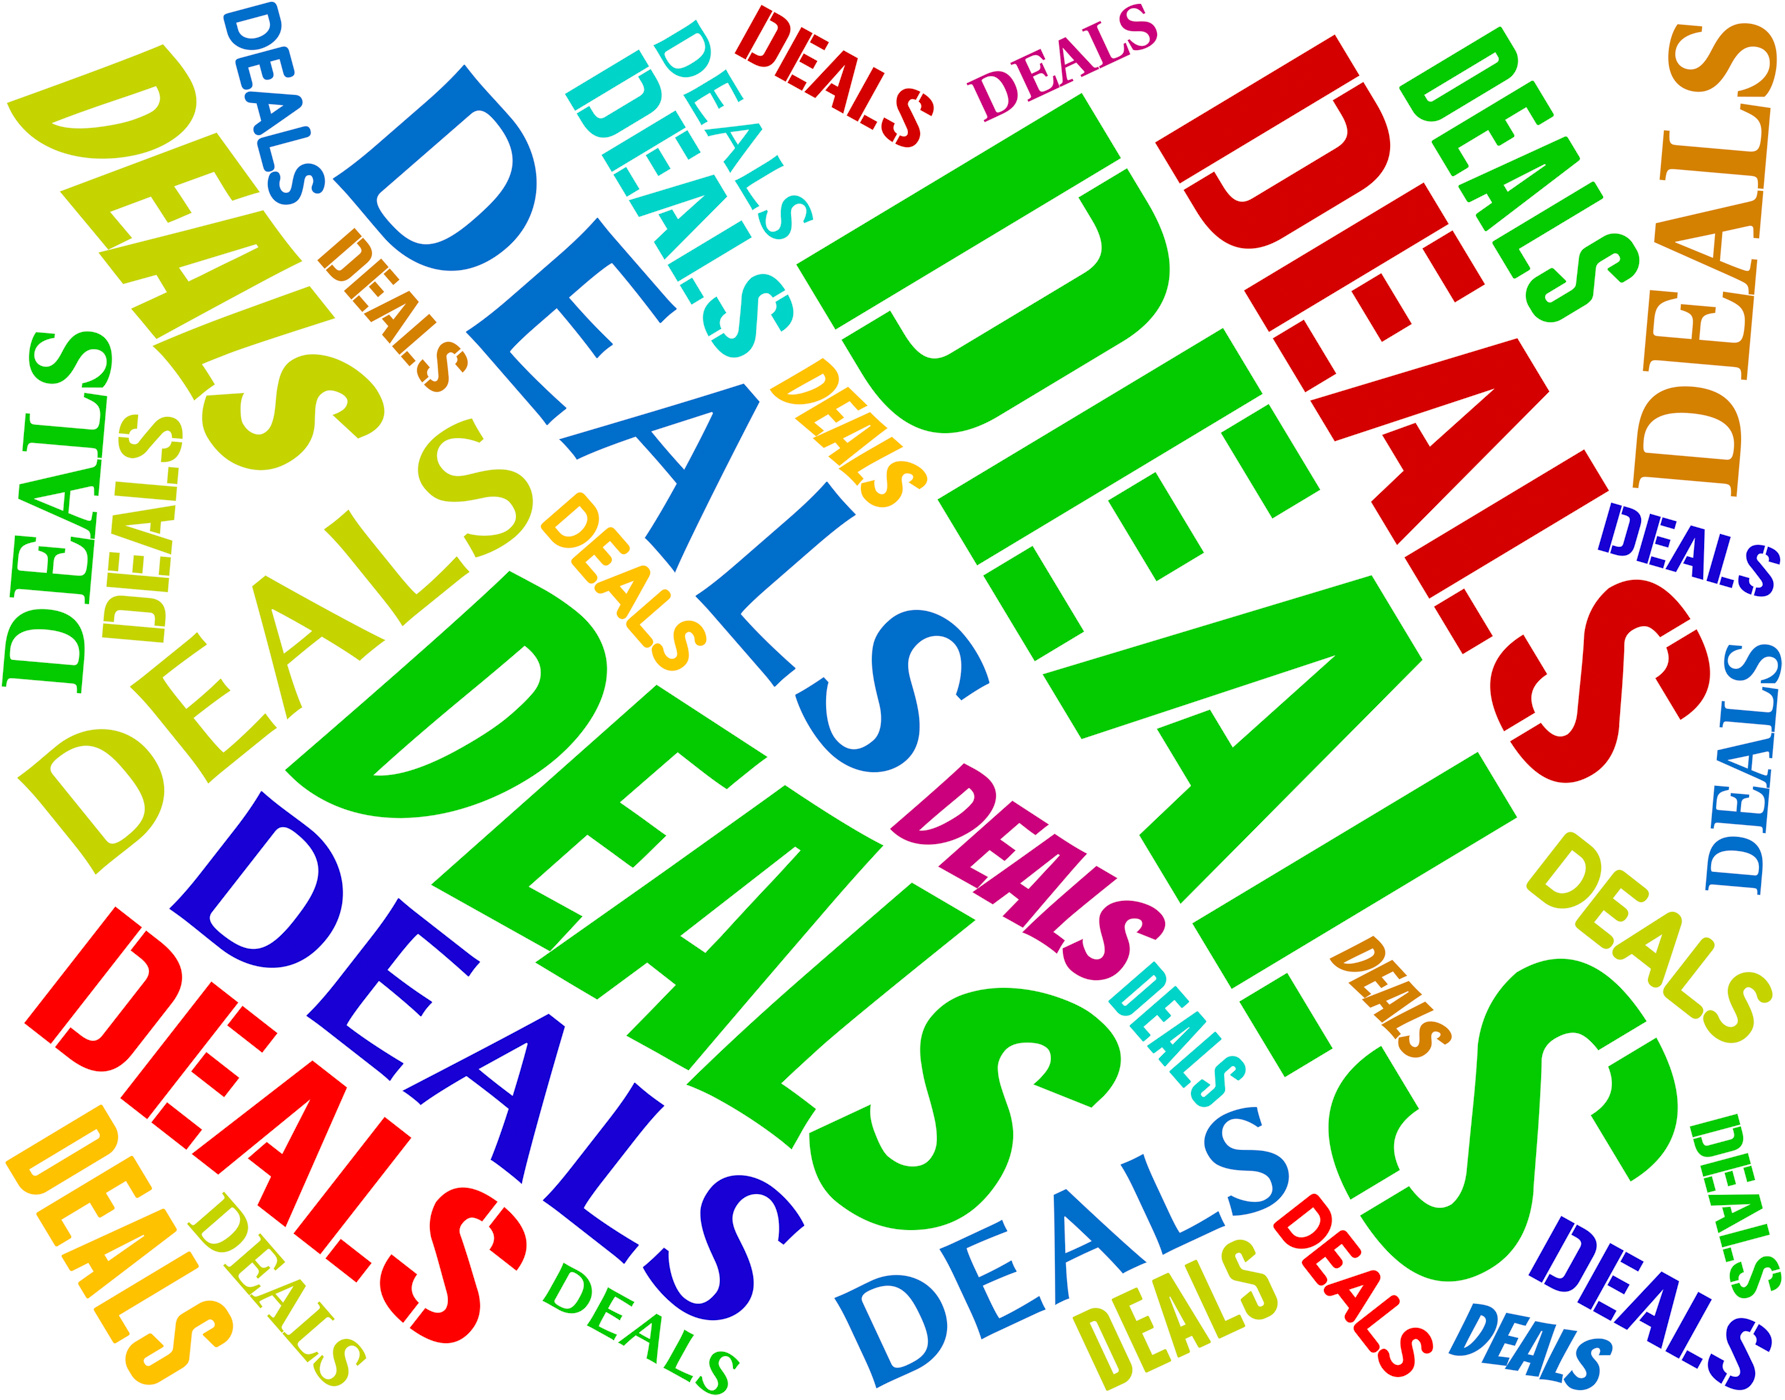 Deals words represents agreement text and dealings photo